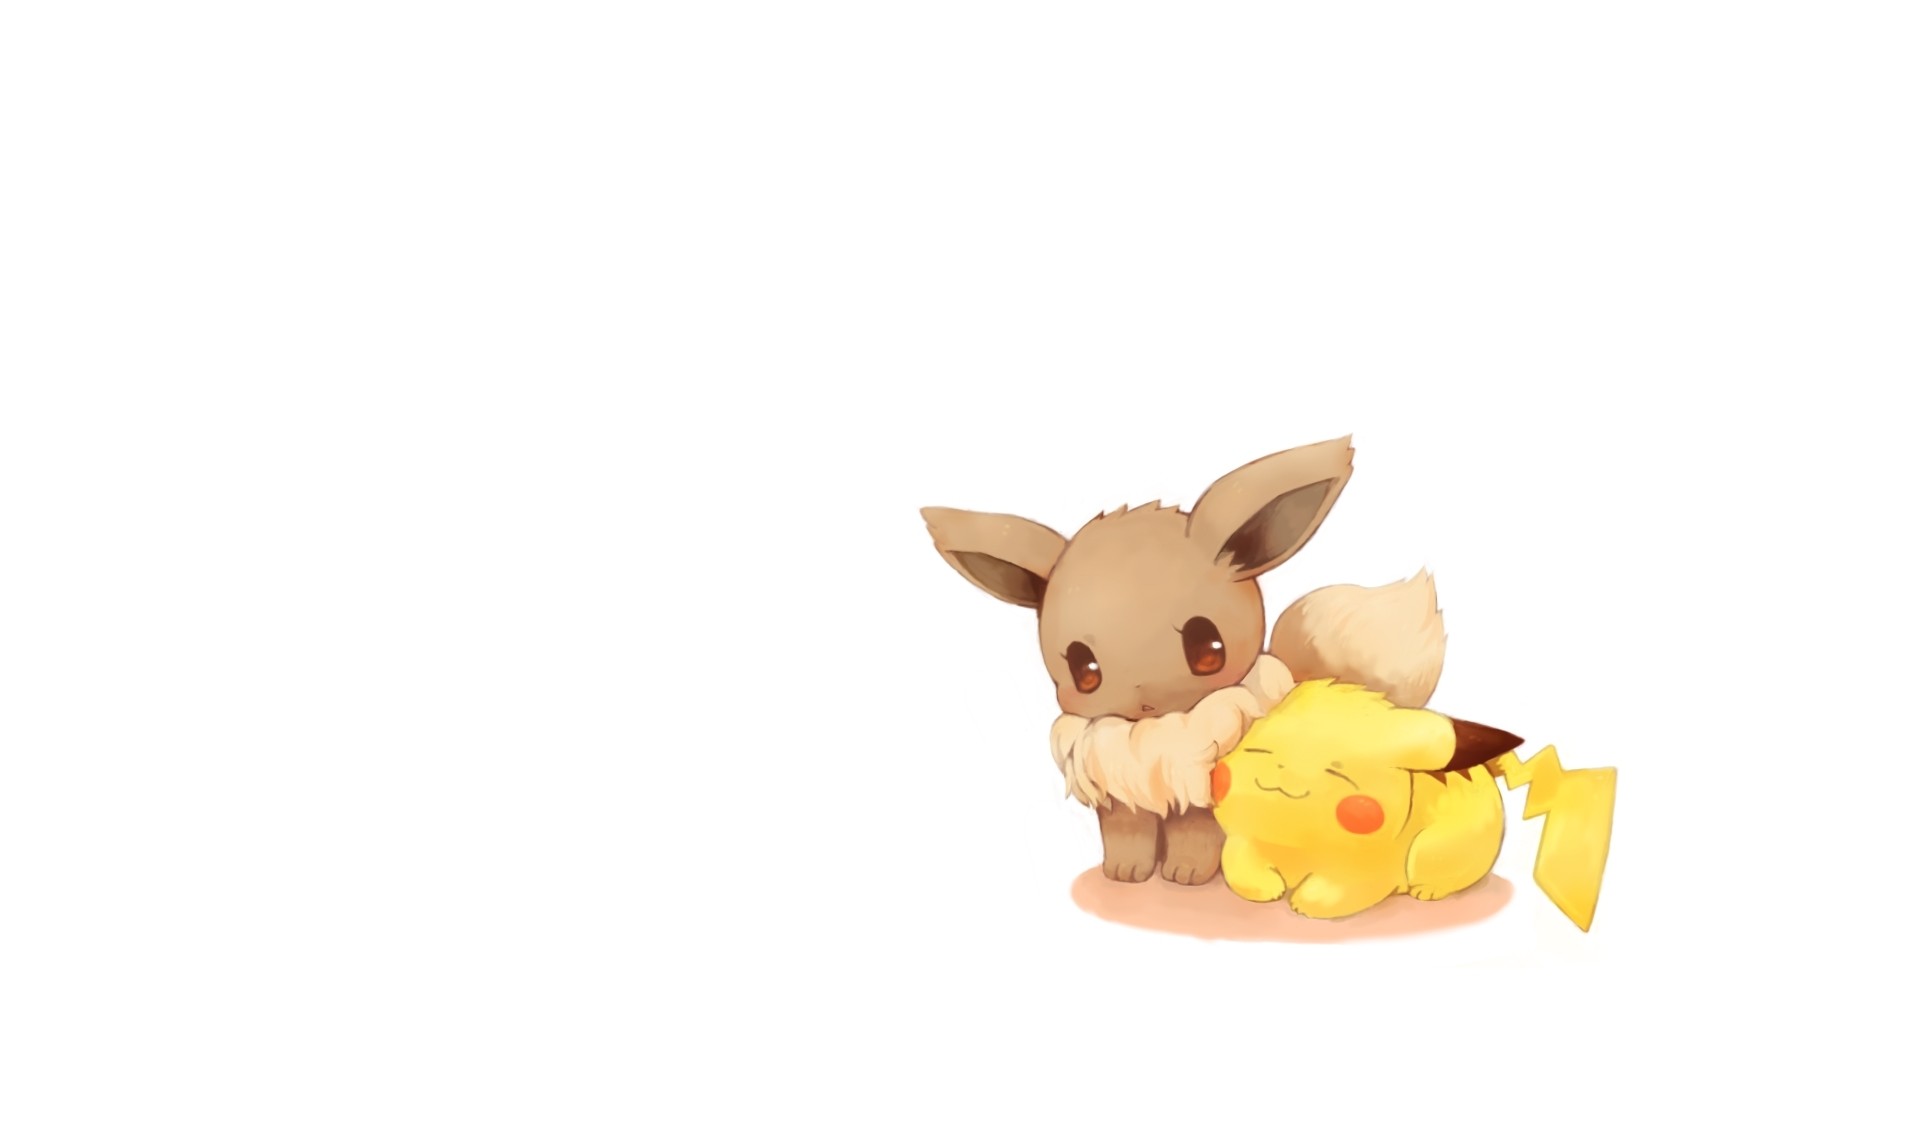 670x1192 Eevee iPhone 6 Wallpaper by JollytheDitto on DeviantArt  Eevee  wallpaper Cool pokemon wallpapers Wallpaper iphone disney